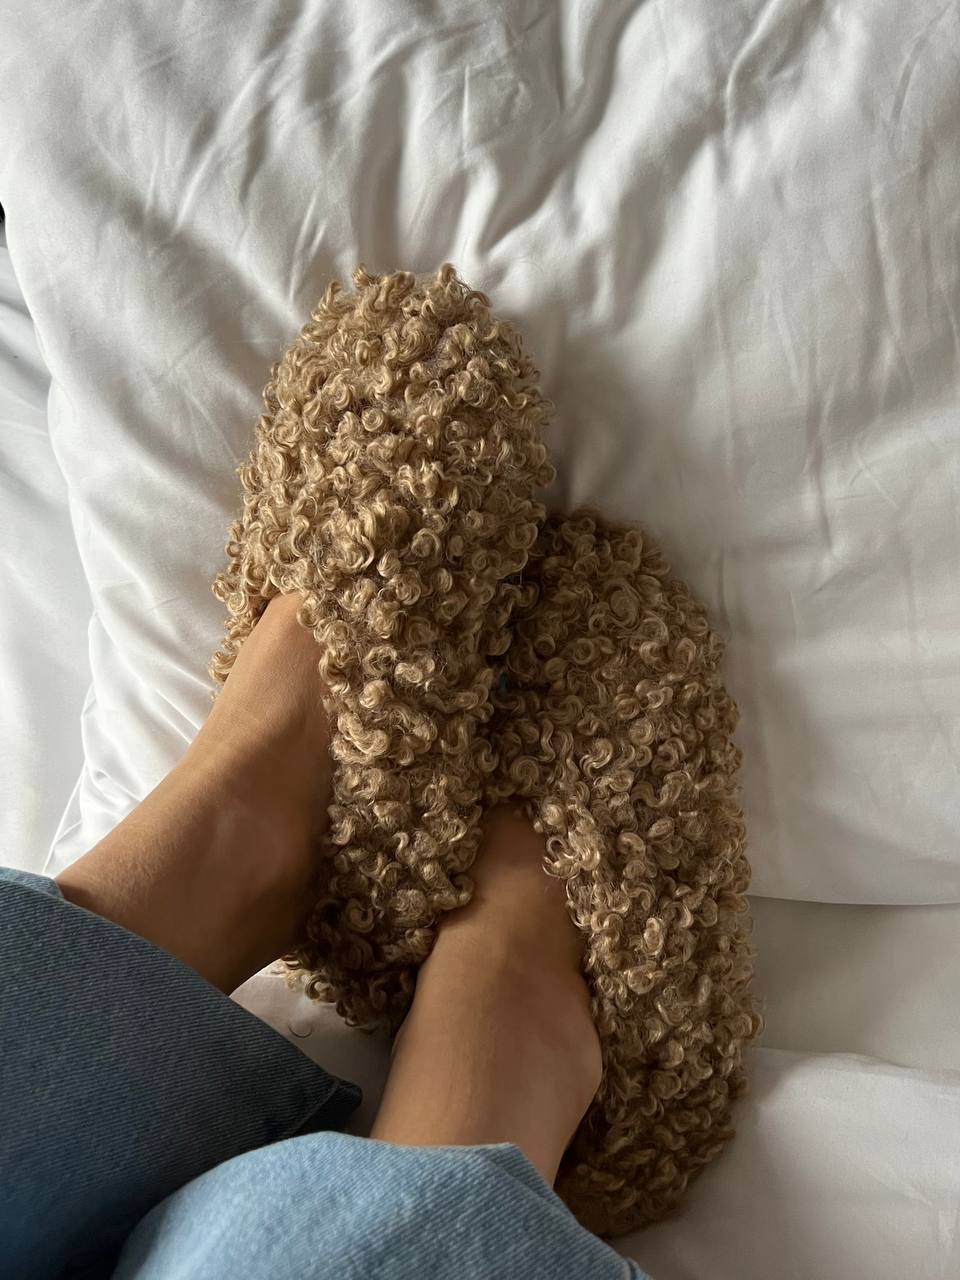 Fluffy beige home slippers